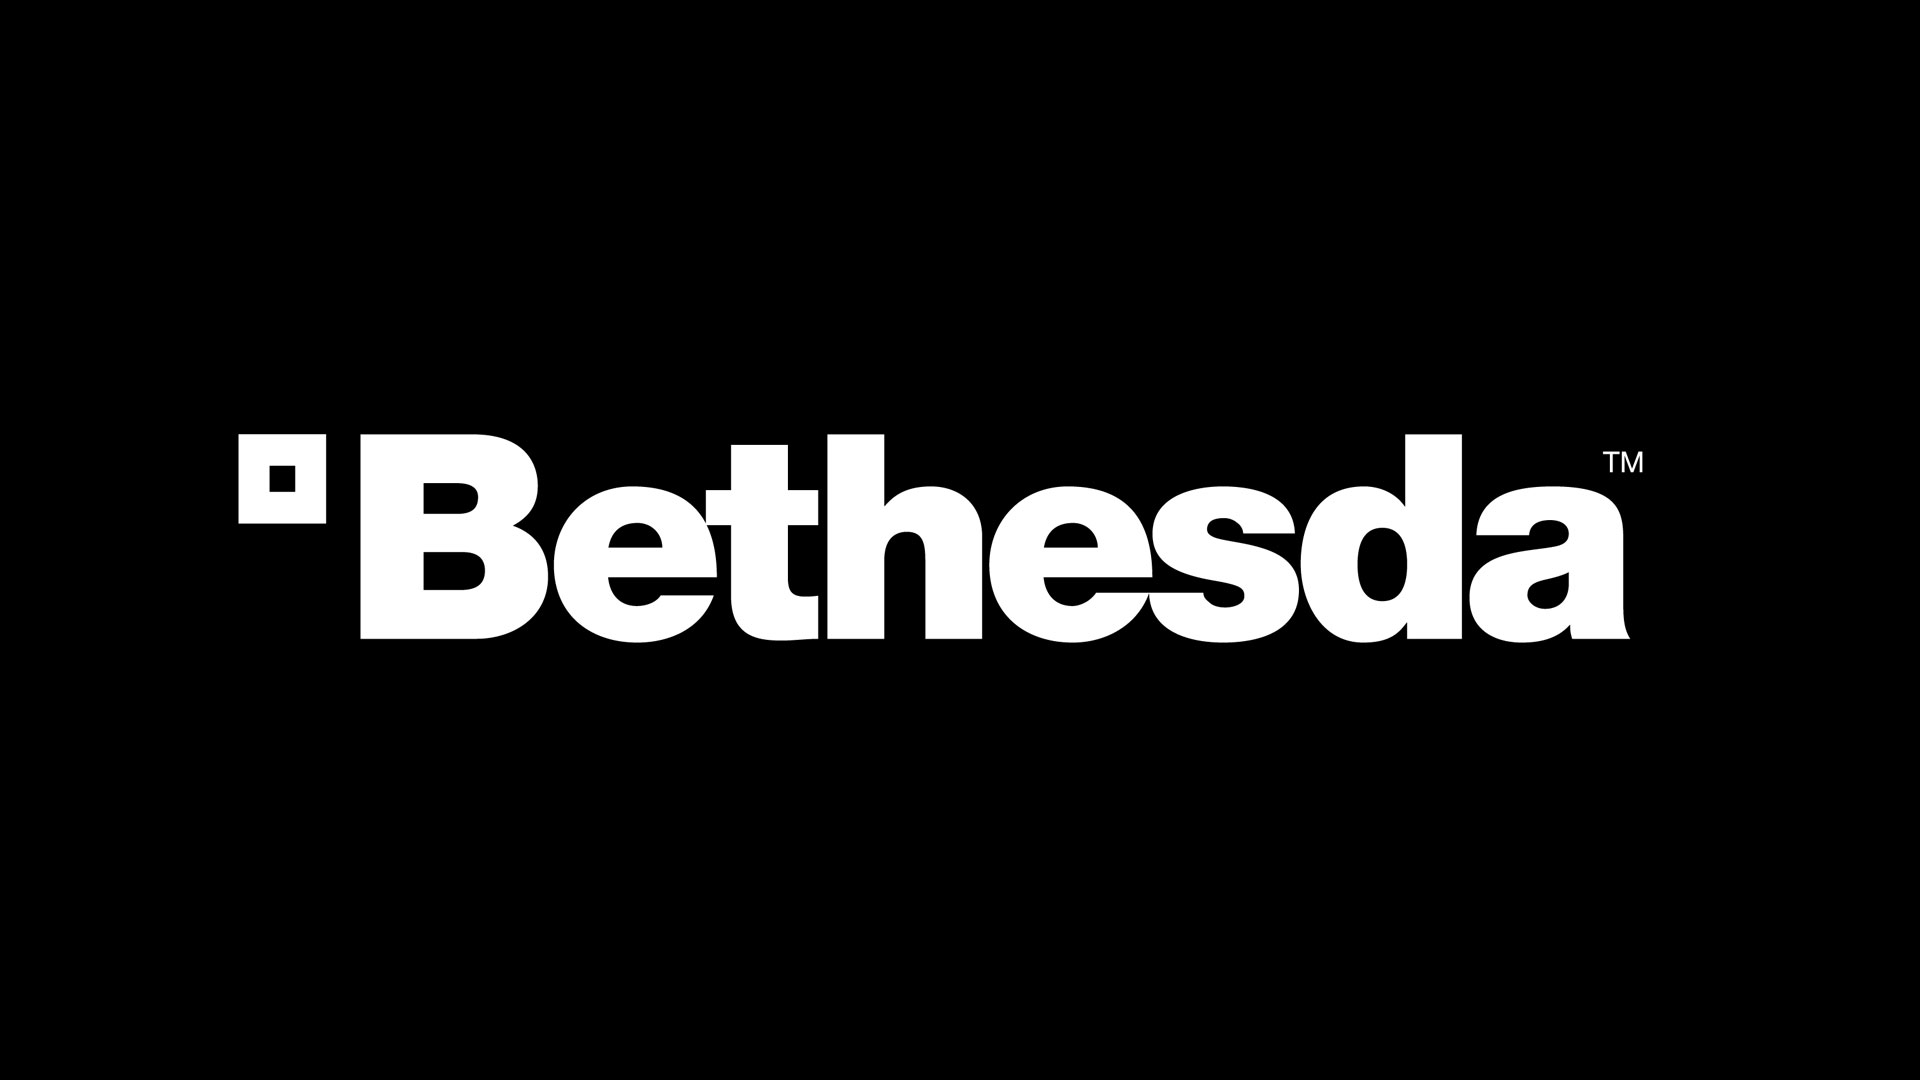 Xbox Executive Says Bethesda’s Games Might Not Be Exclusives, But Will Be Best On Microsoft’s Platform